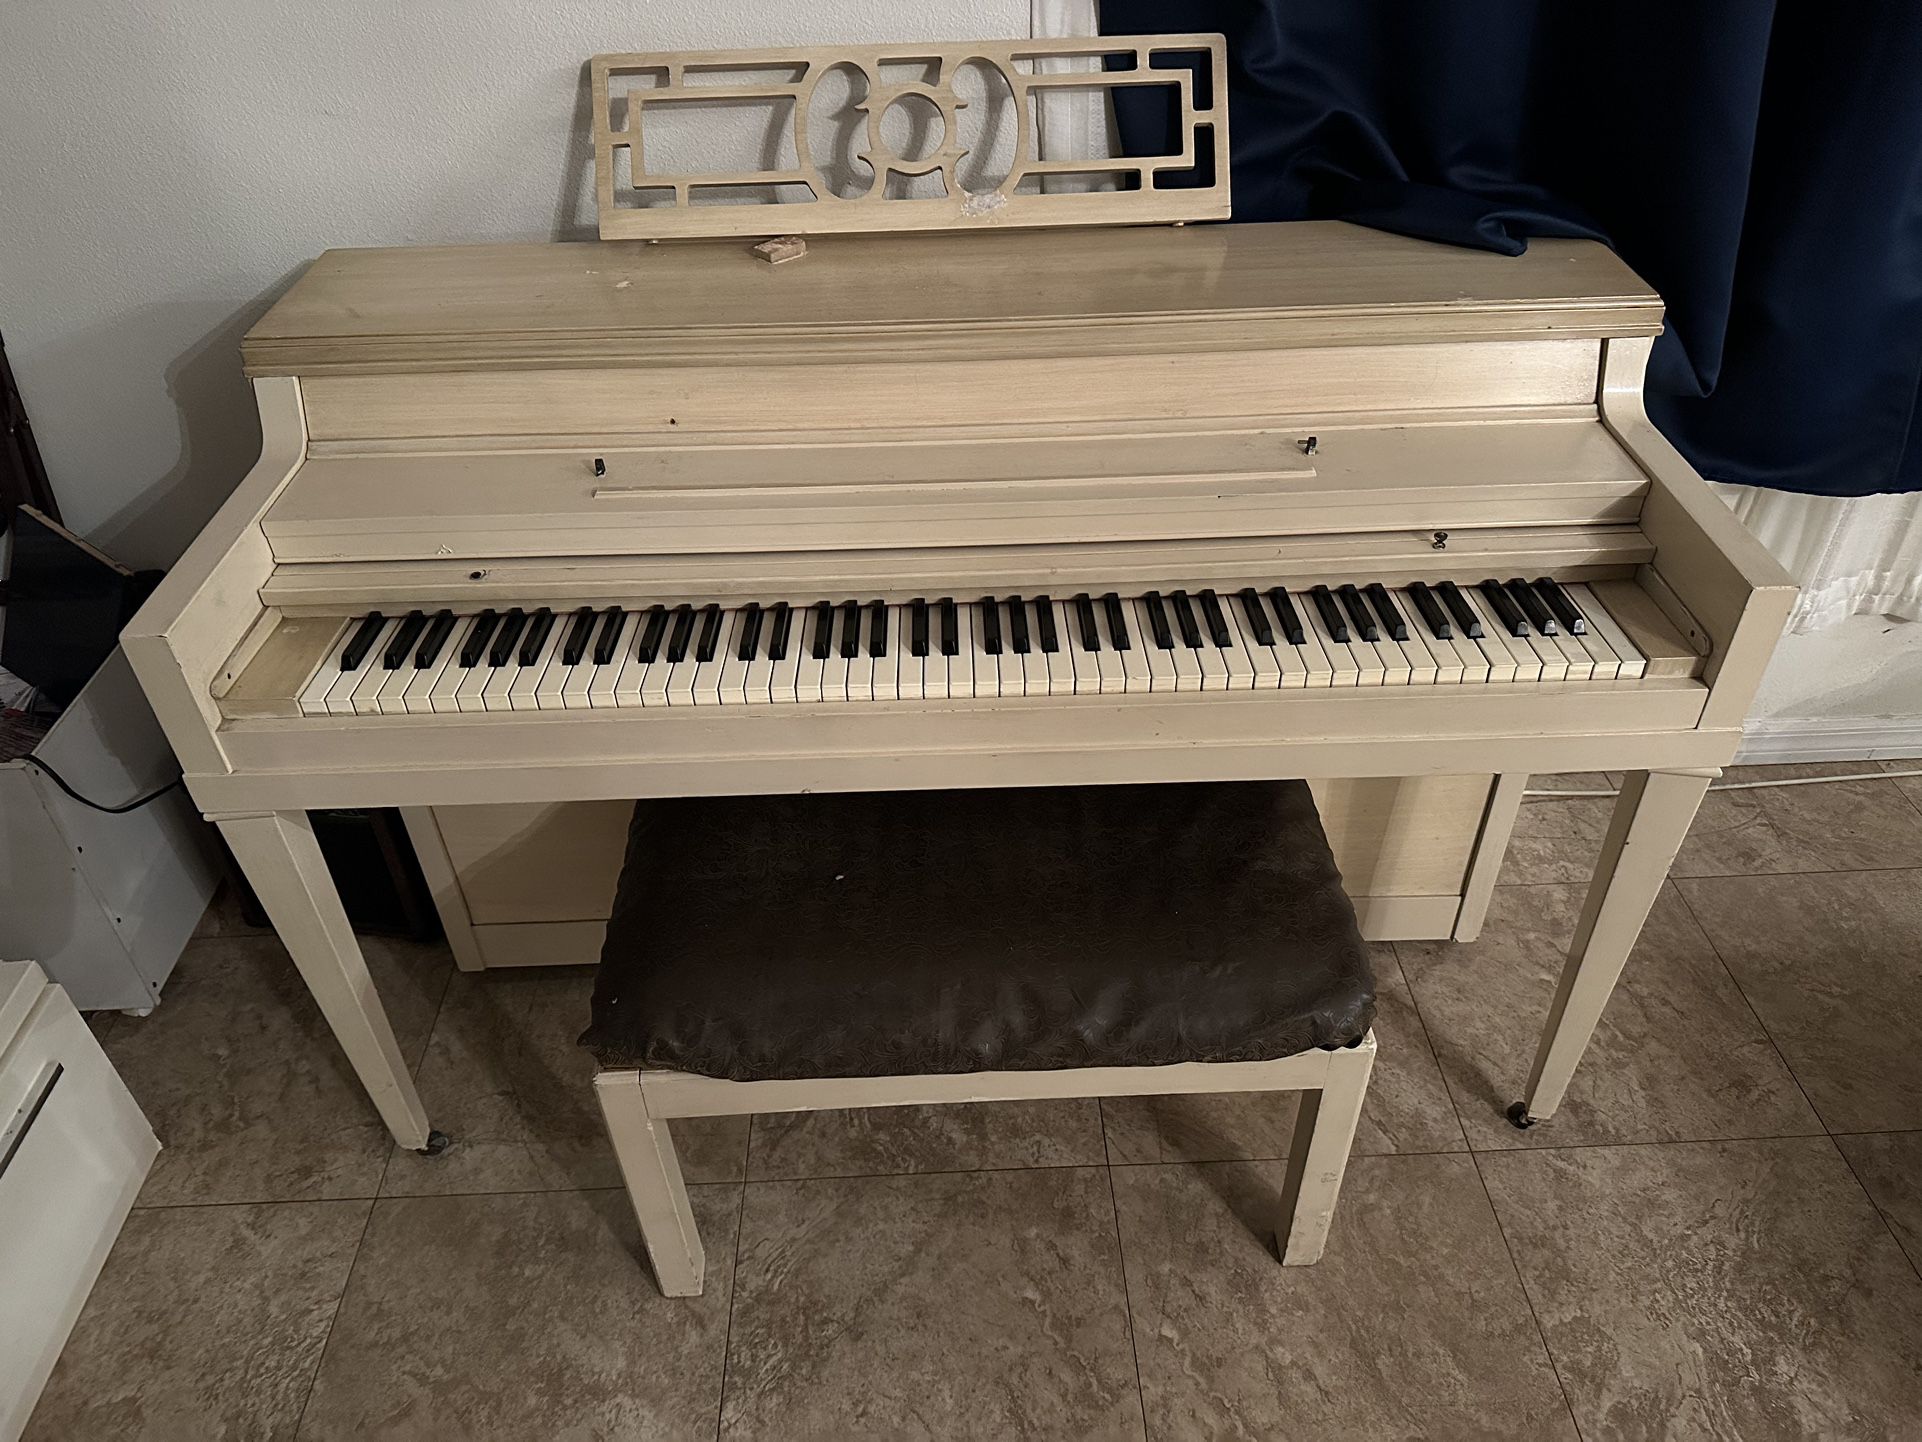 Piano for sale beige. around medium size fairly large